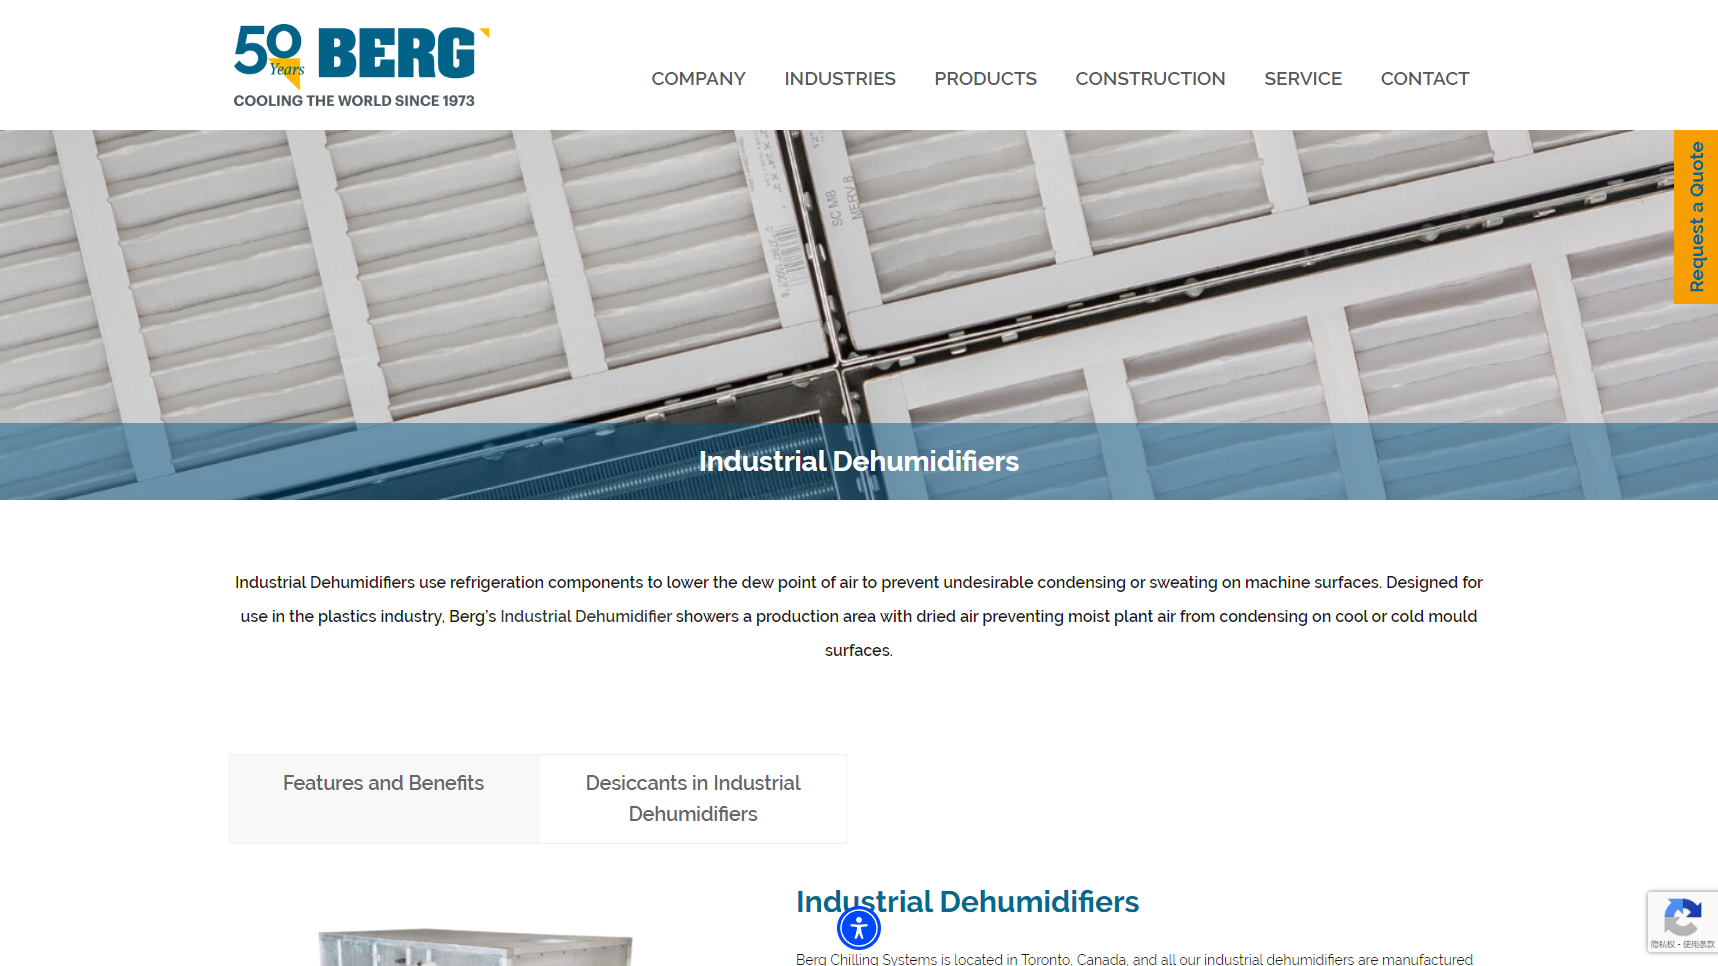 Berg Chilling Systems Inc. - Industrial Dehumidifier Manufacturer